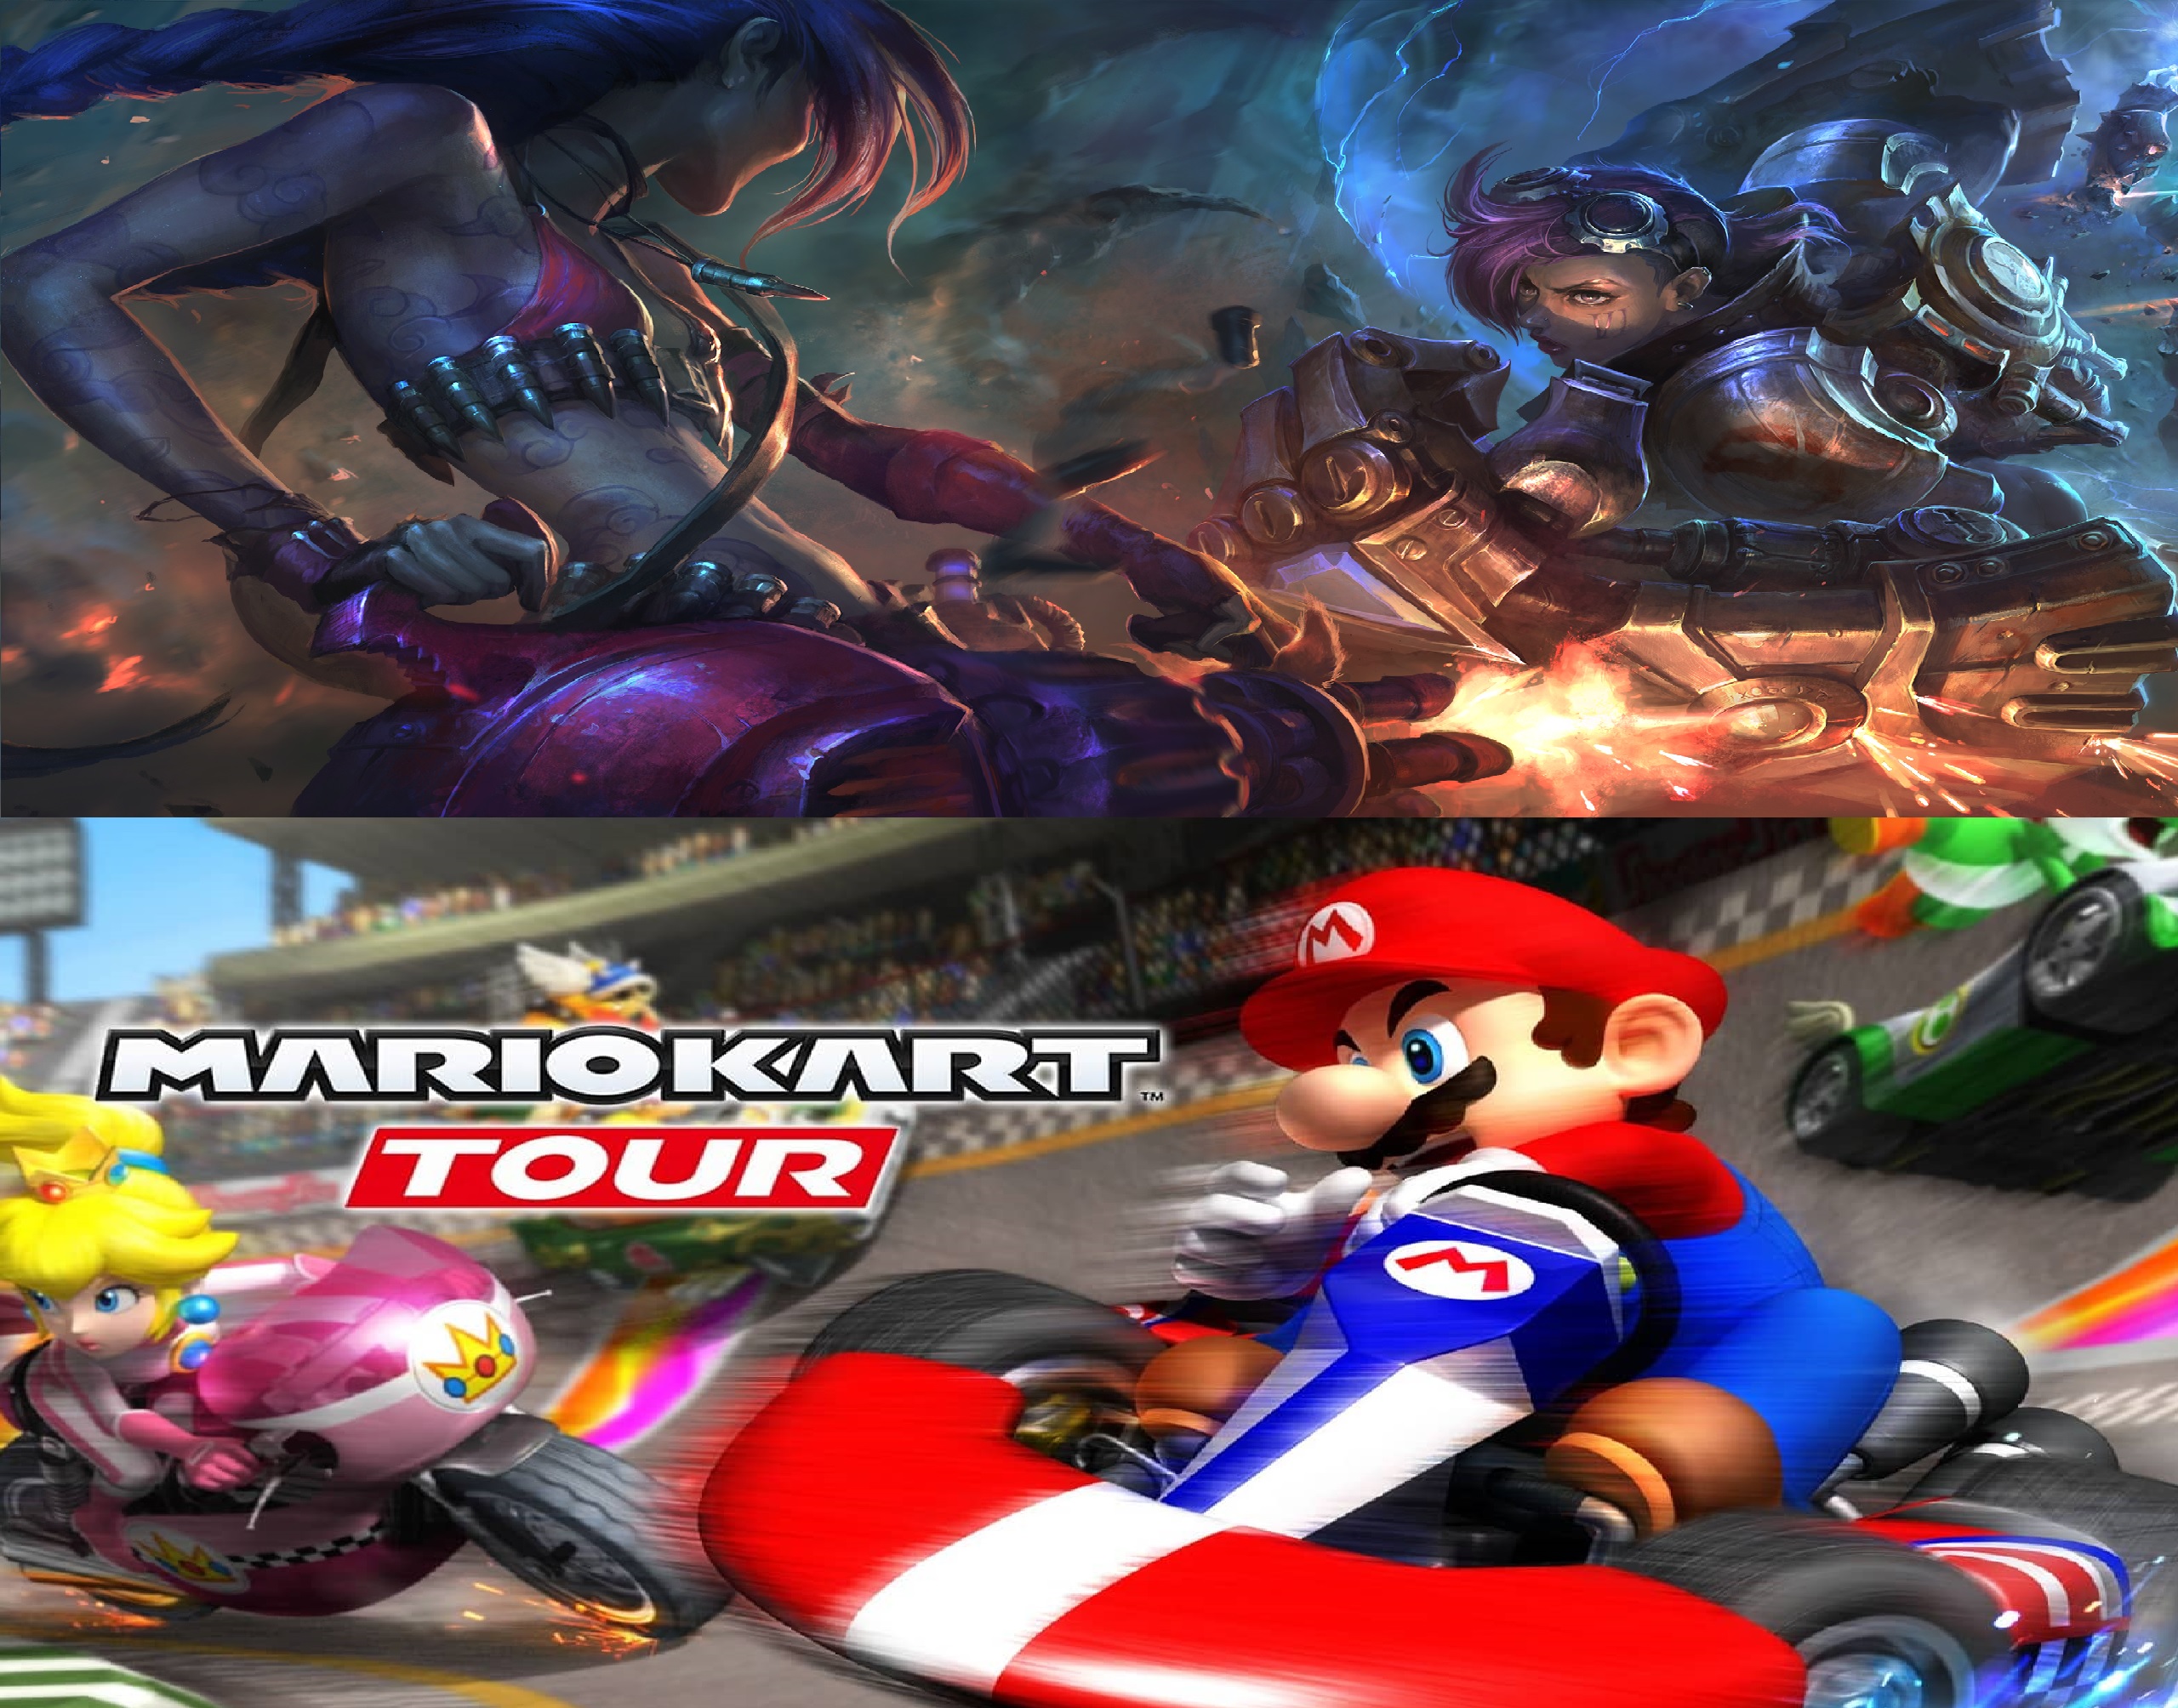 Android Games Update: League of Legends and Mario Kart is coming to mobile